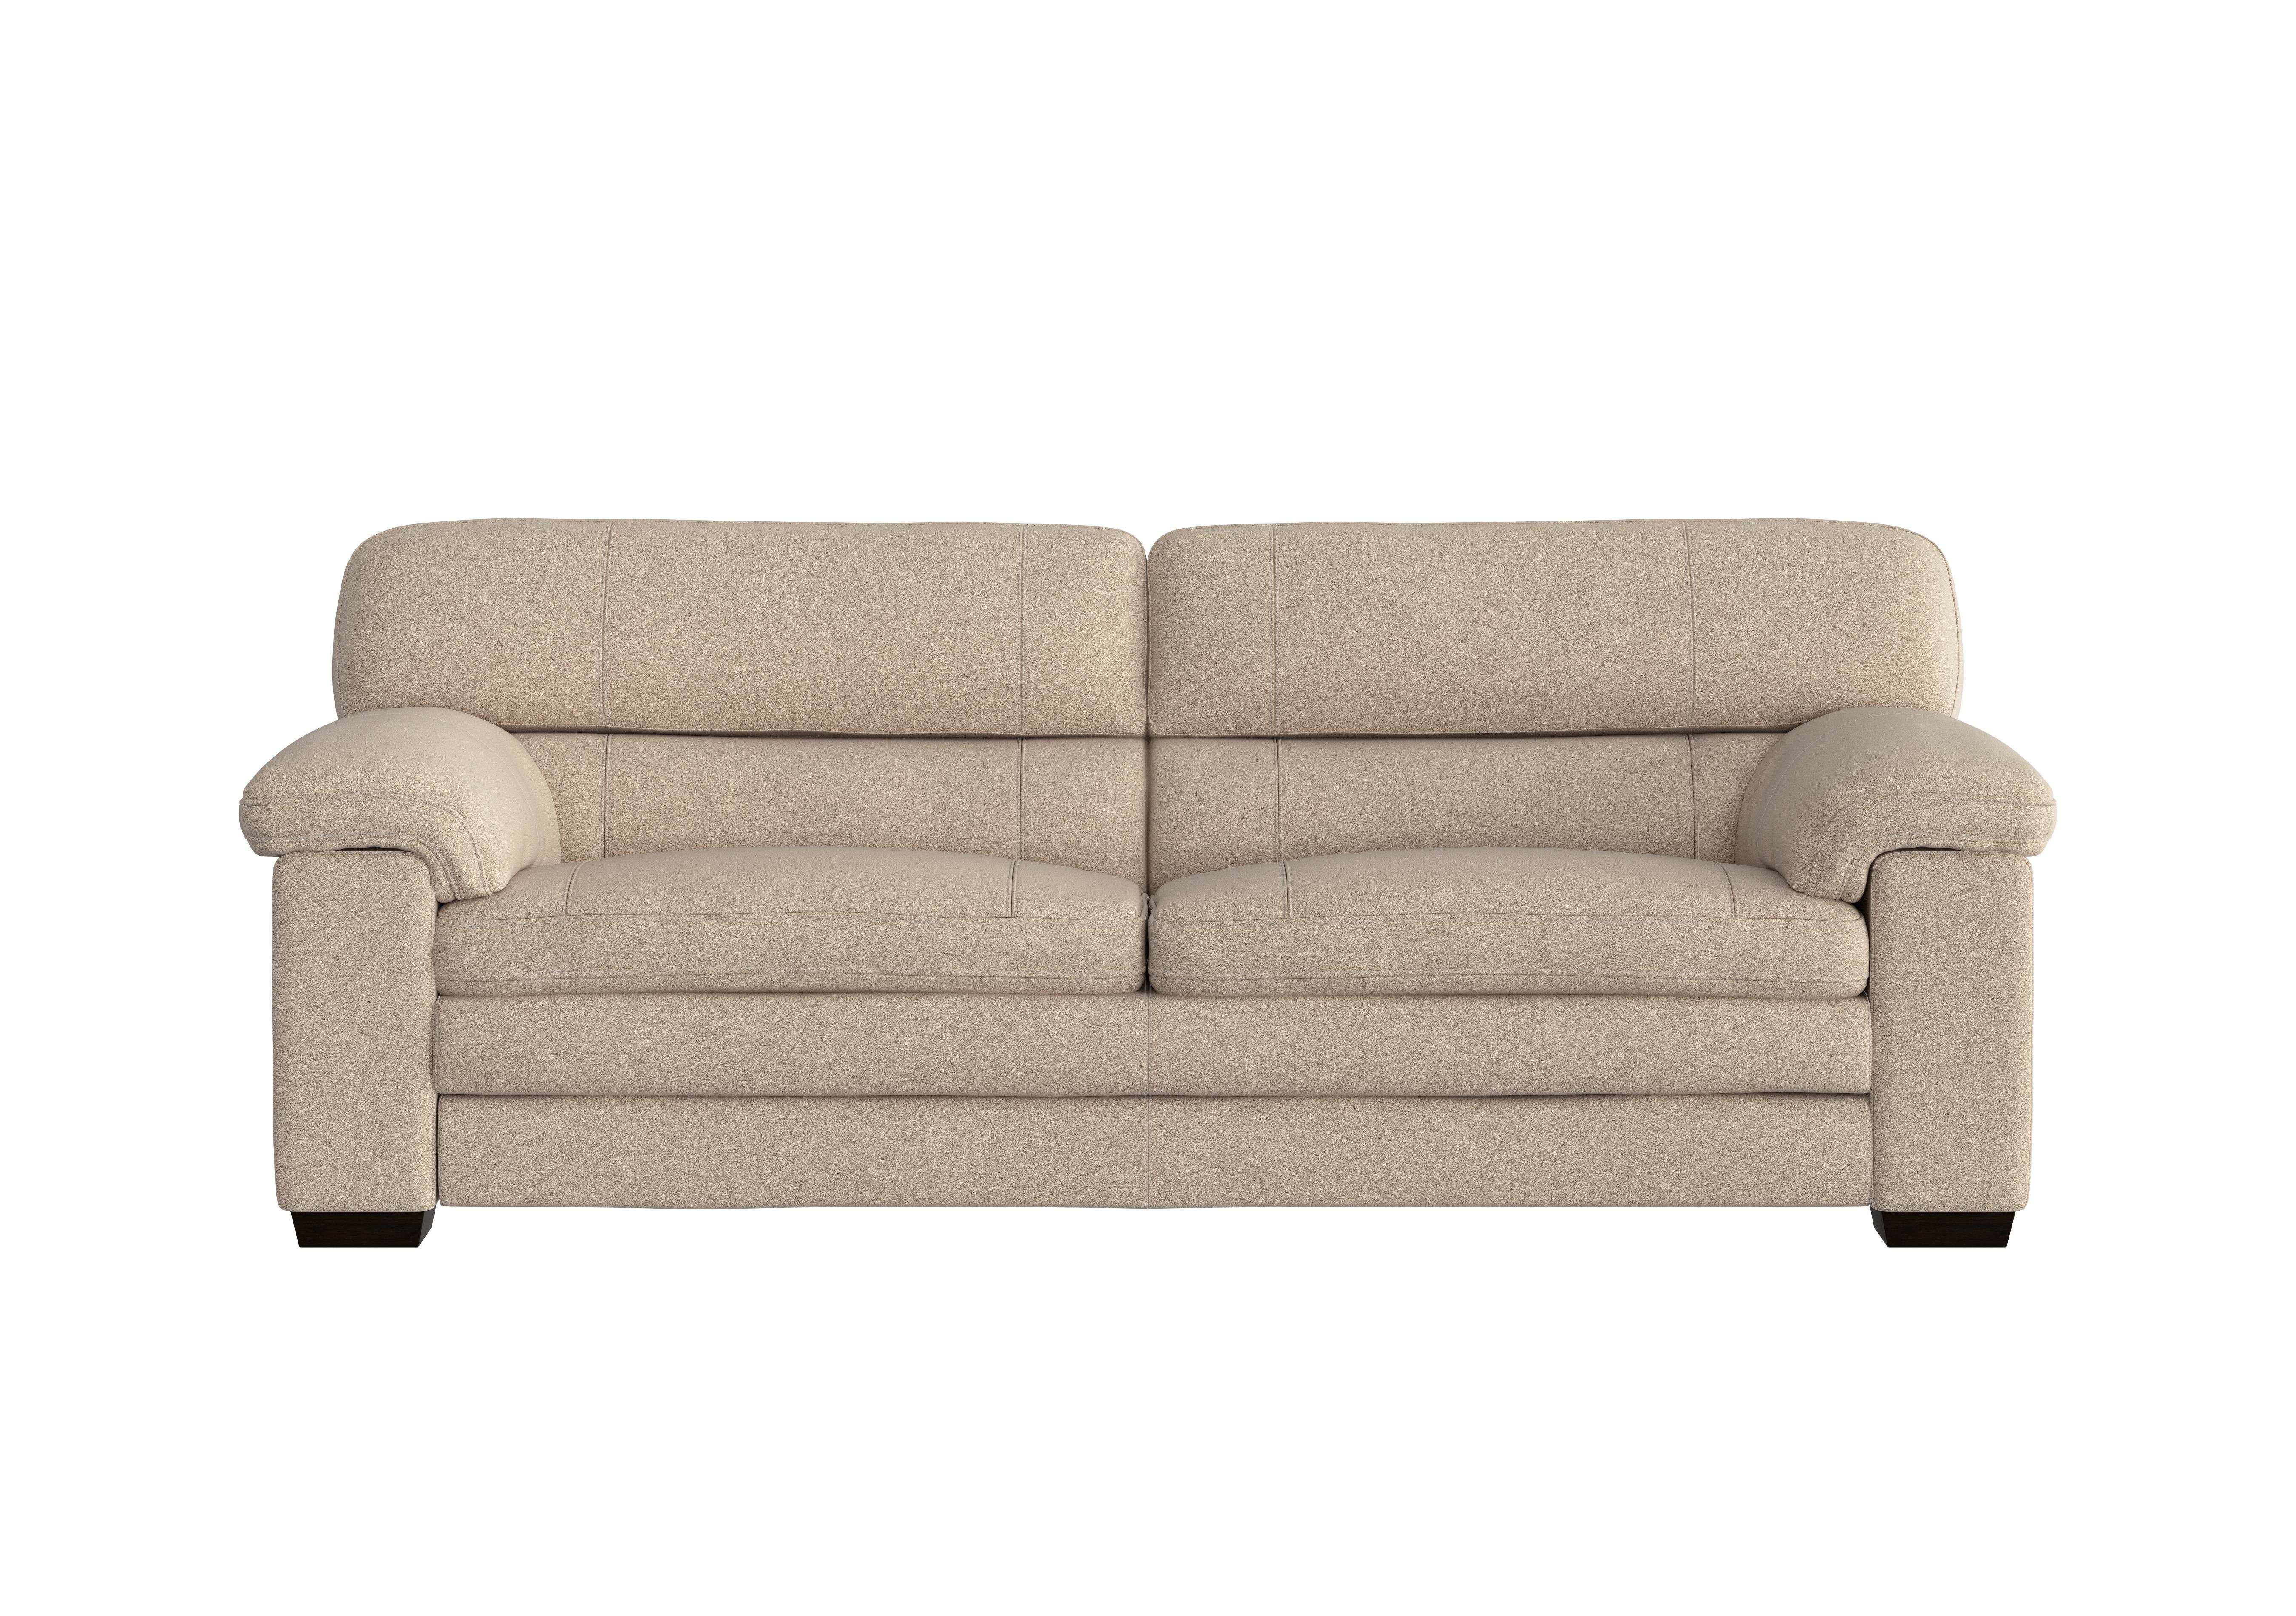 Cozee Fabric 3 Seater Sofa in Bfa-Blj-R20 Bisque on Furniture Village